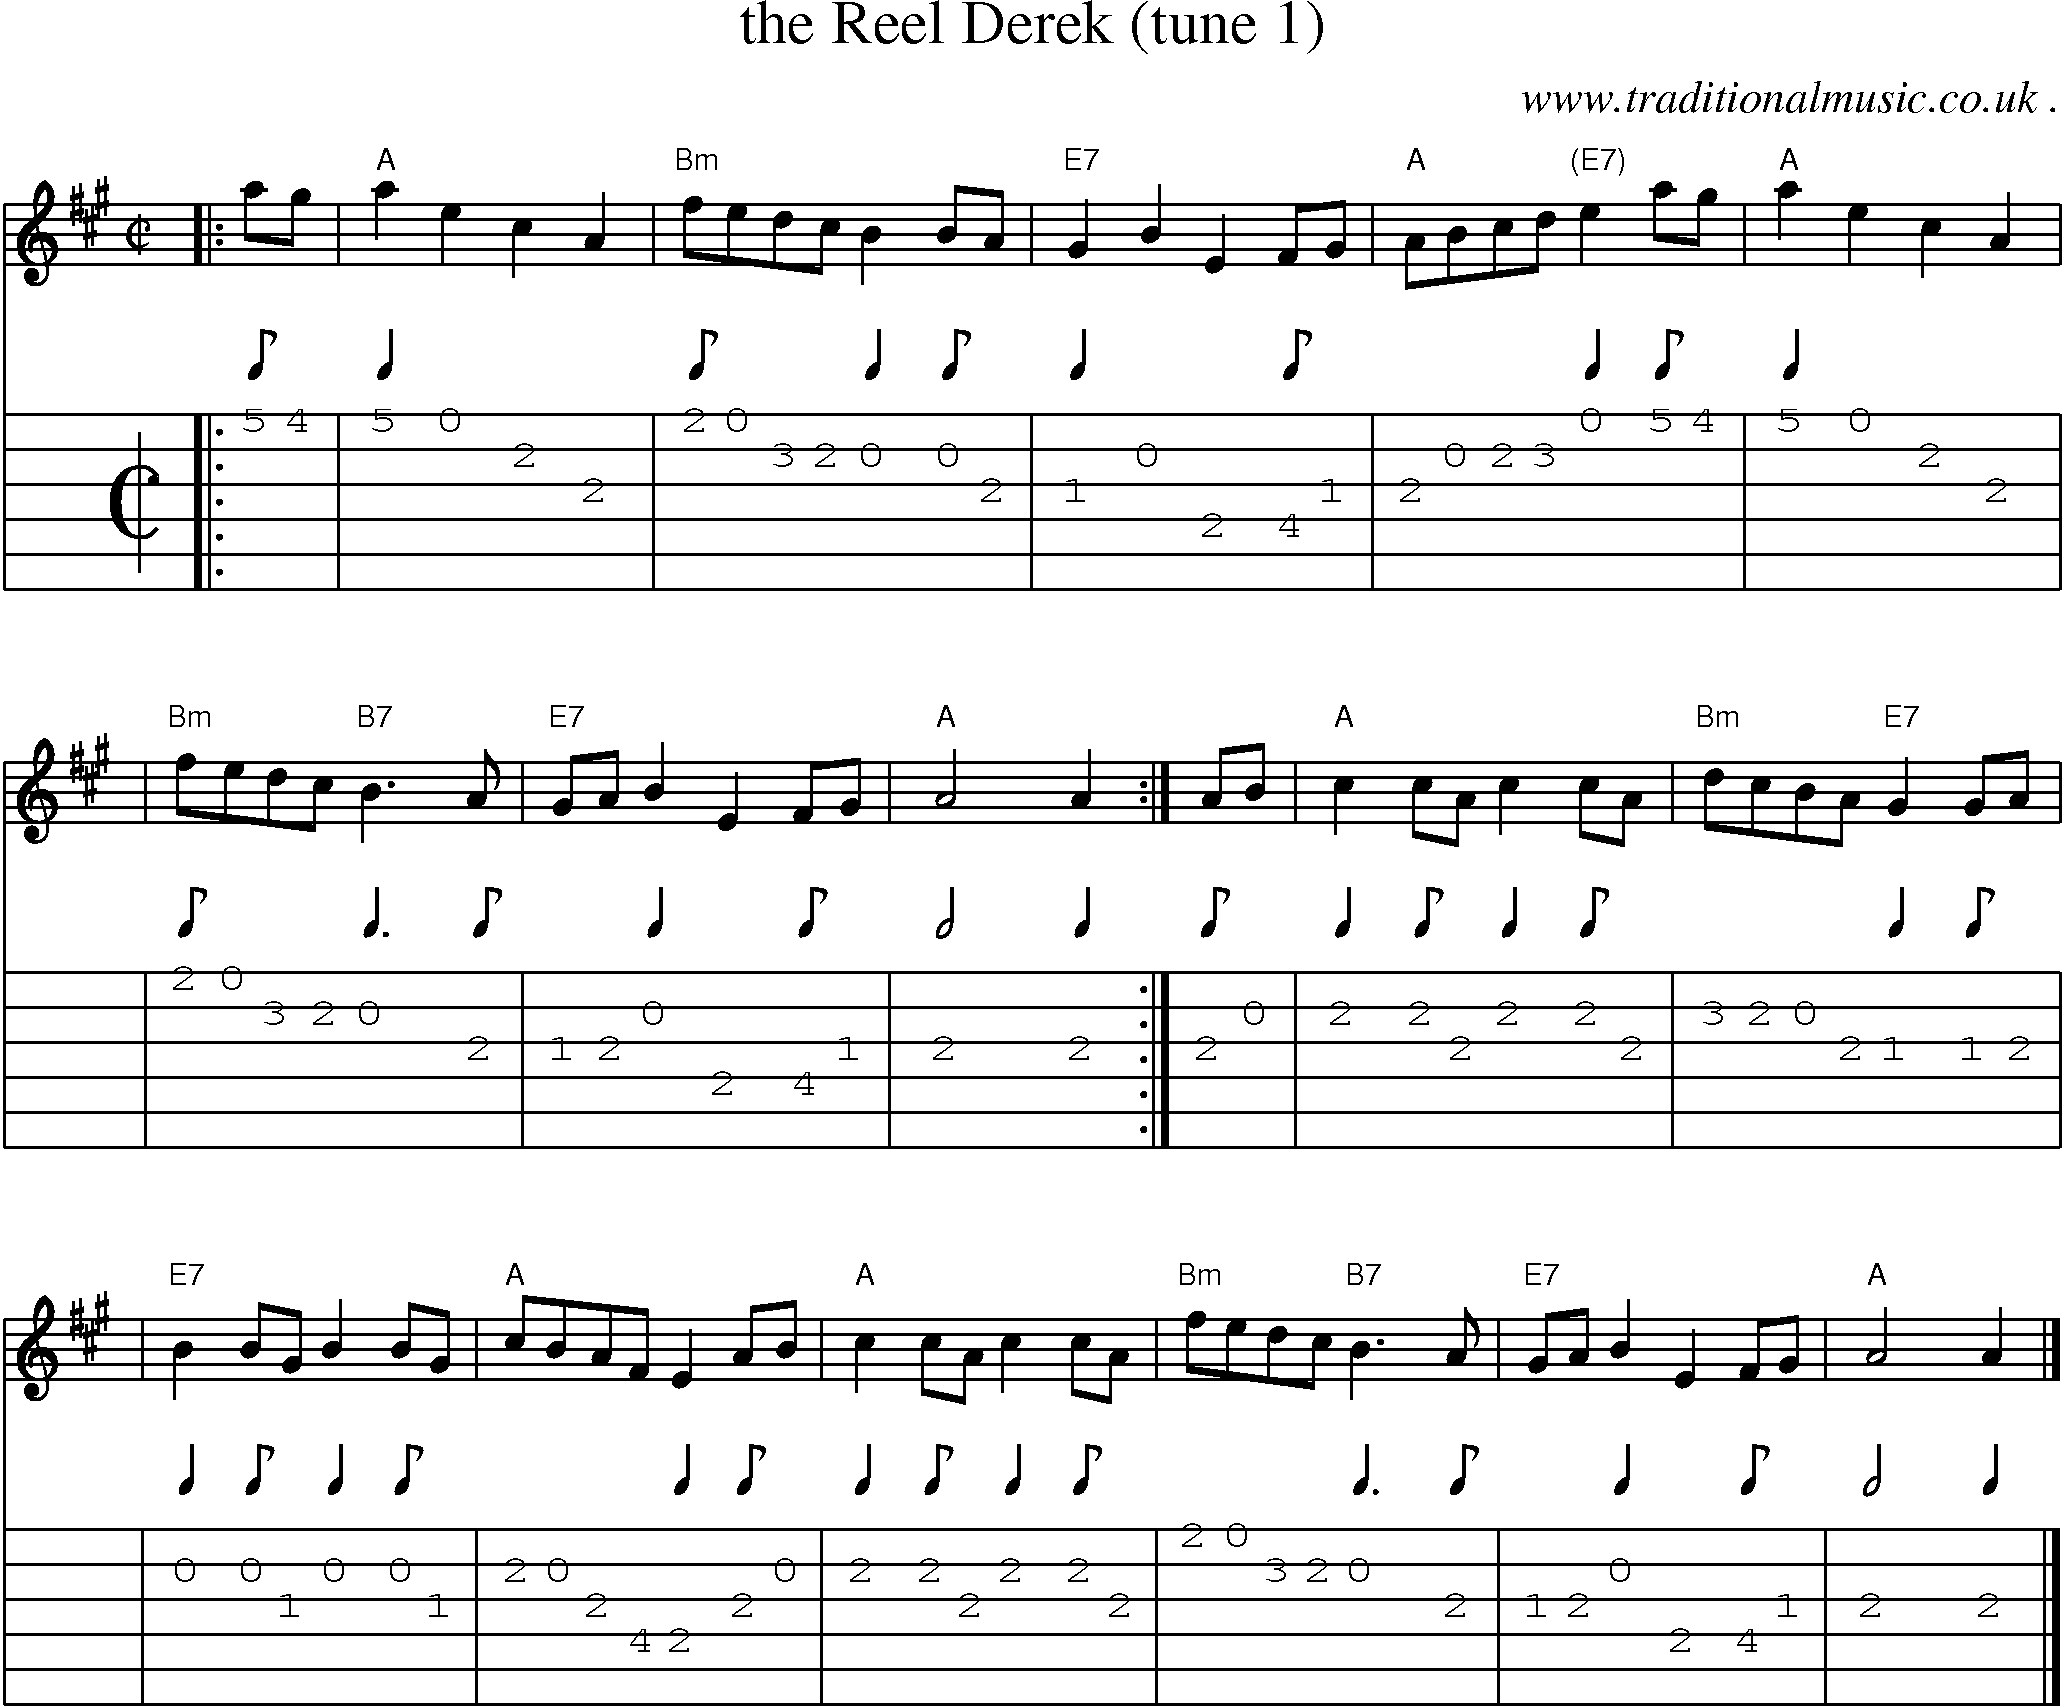 Sheet-music  score, Chords and Guitar Tabs for The Reel Derek Tune 1